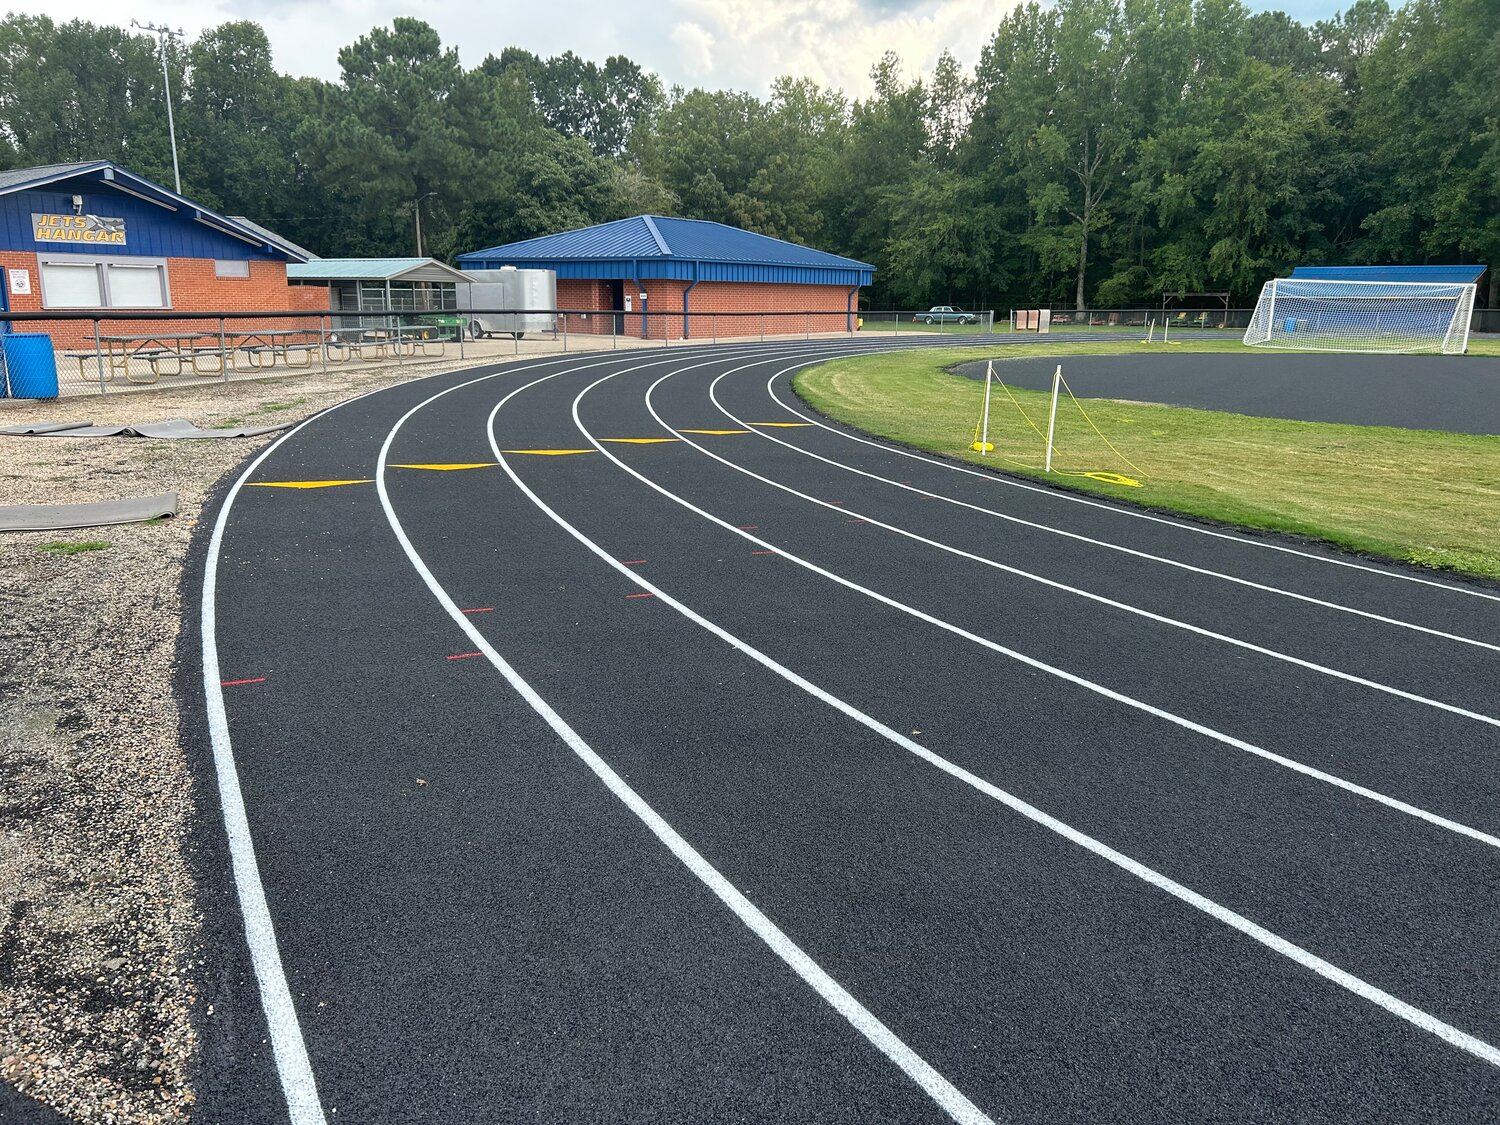 Jordan-Matthews has a new rubber track after replacing the running surface as part of a facilities improvement project (Photo by Asheebo Rojas, Chatham News & Record)